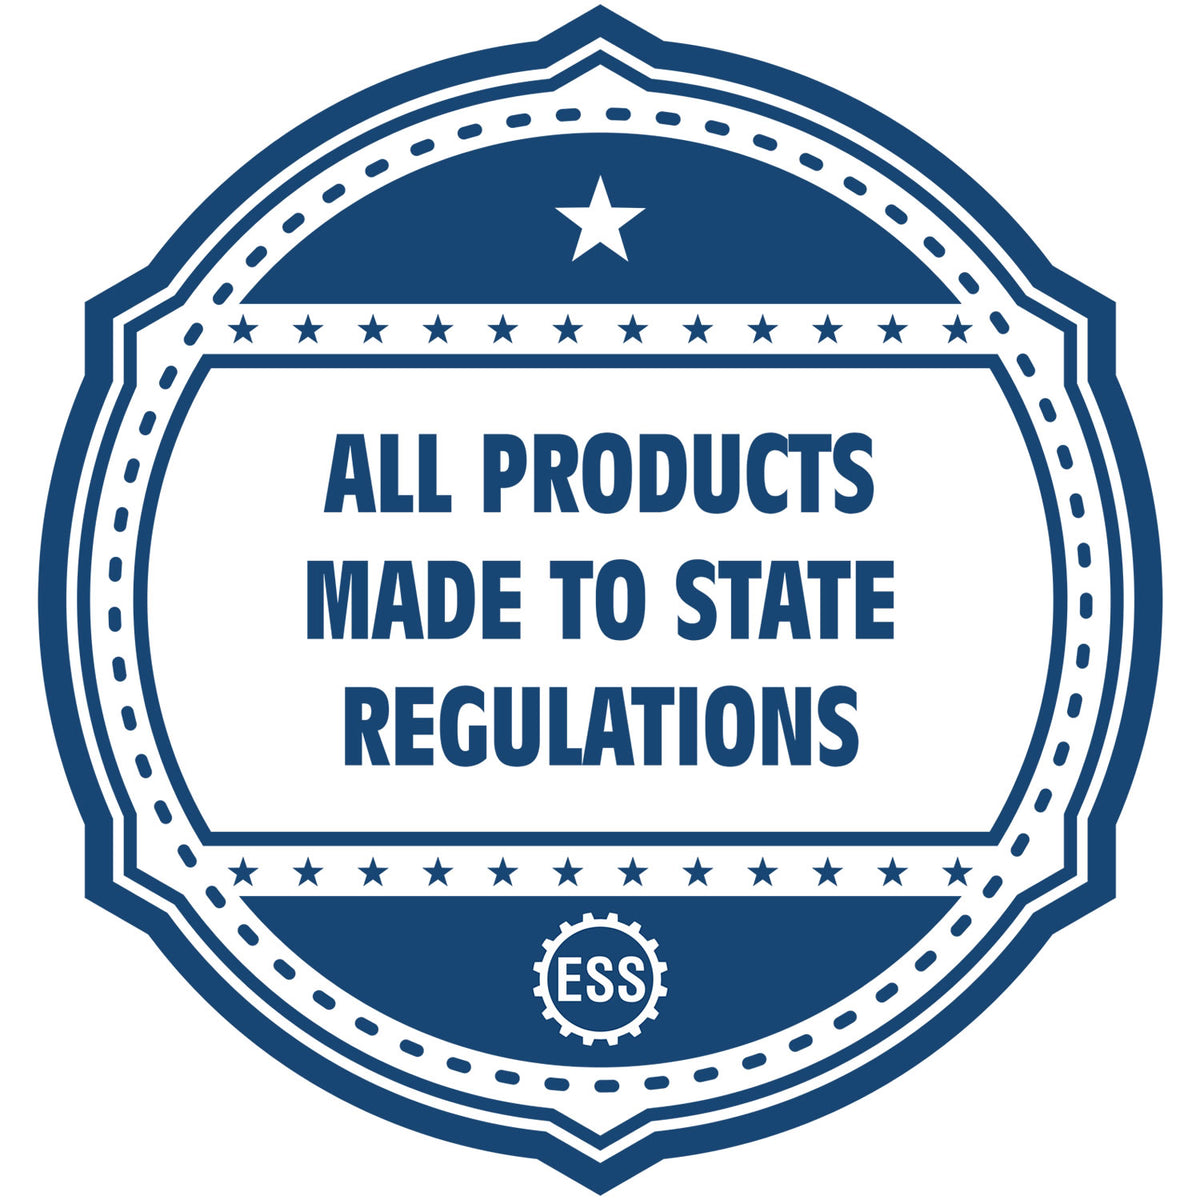 An icon or badge element for the Super Slim Kansas Notary Public Stamp showing that this product is made in compliance with state regulations.